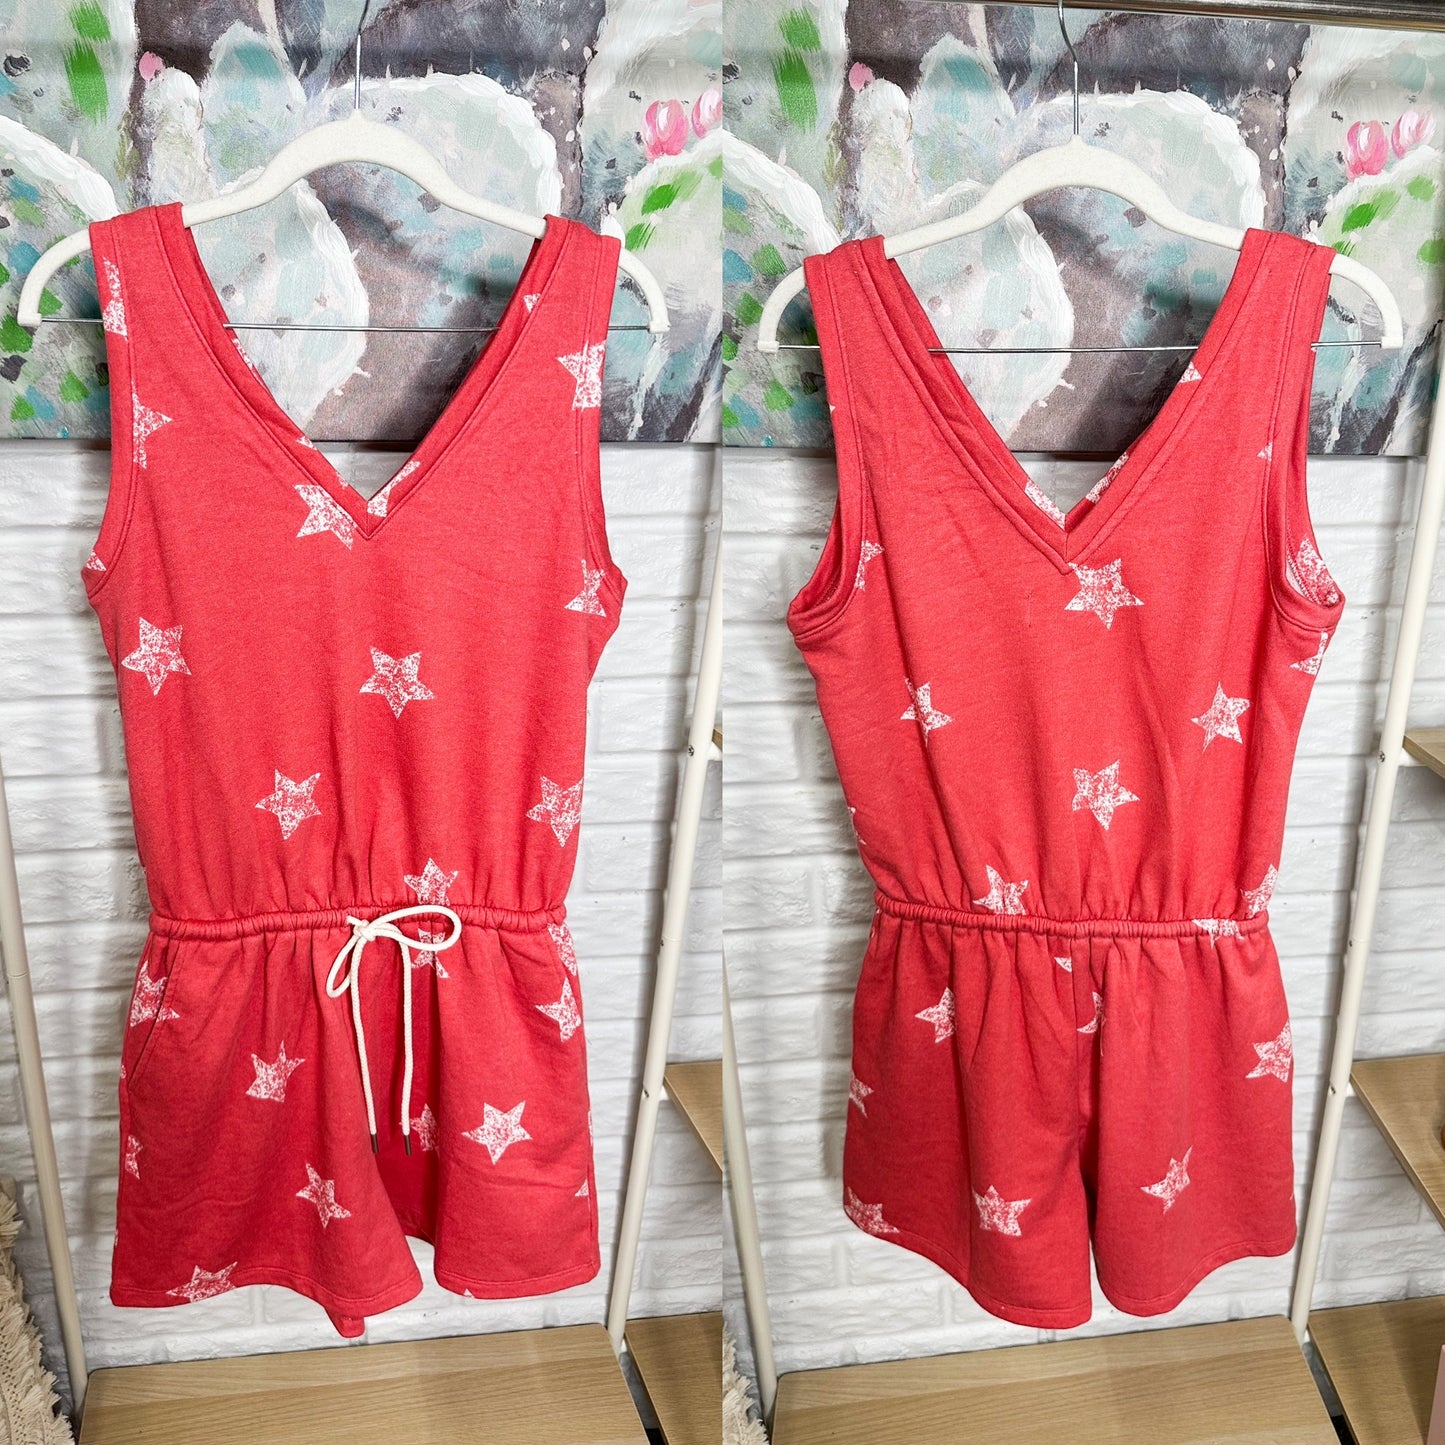 Lou & Grey New Star Terry V Neck Romper Size XS